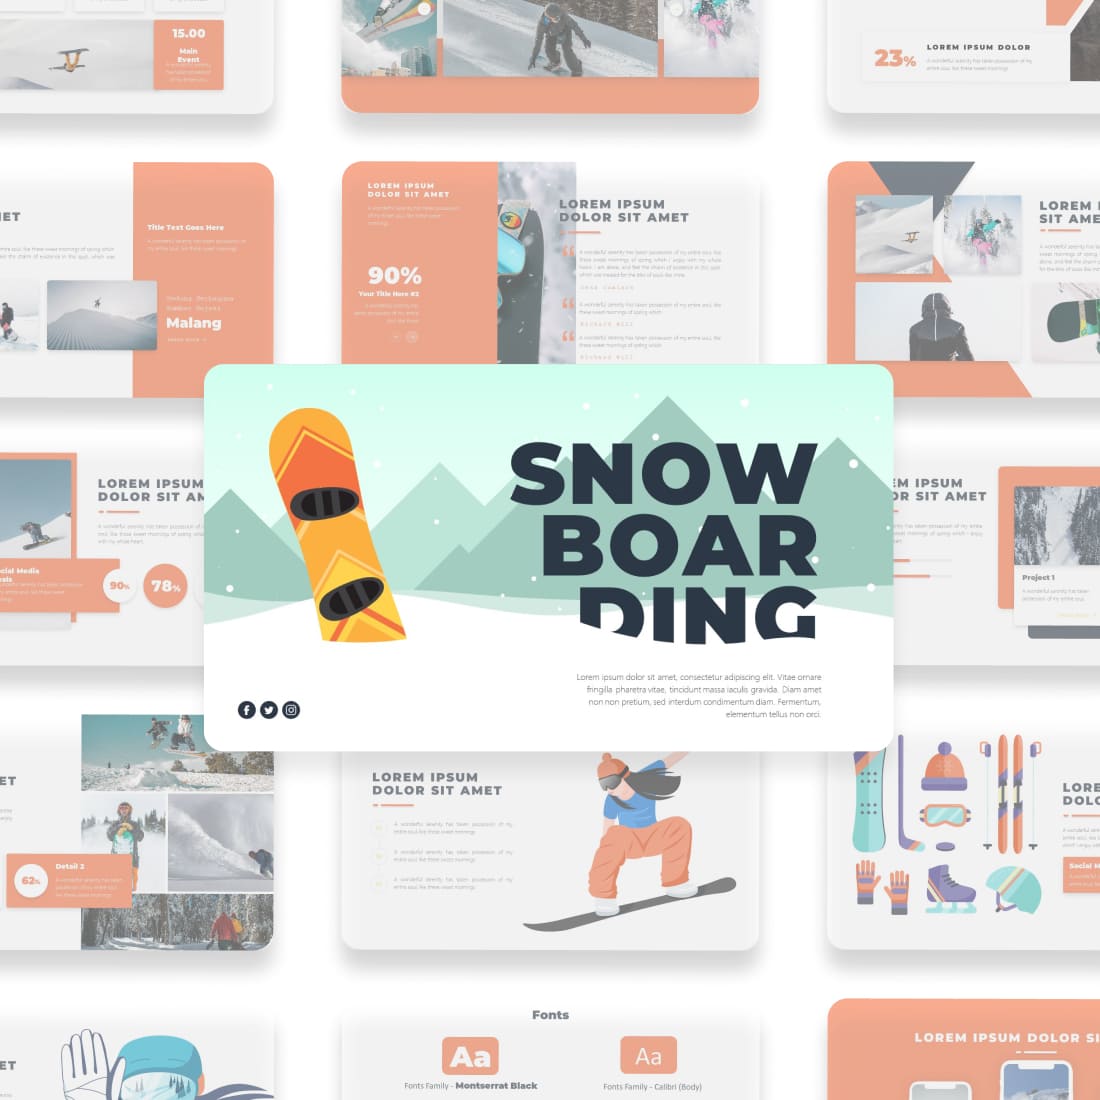 Snowboarding Keynote Template cover.